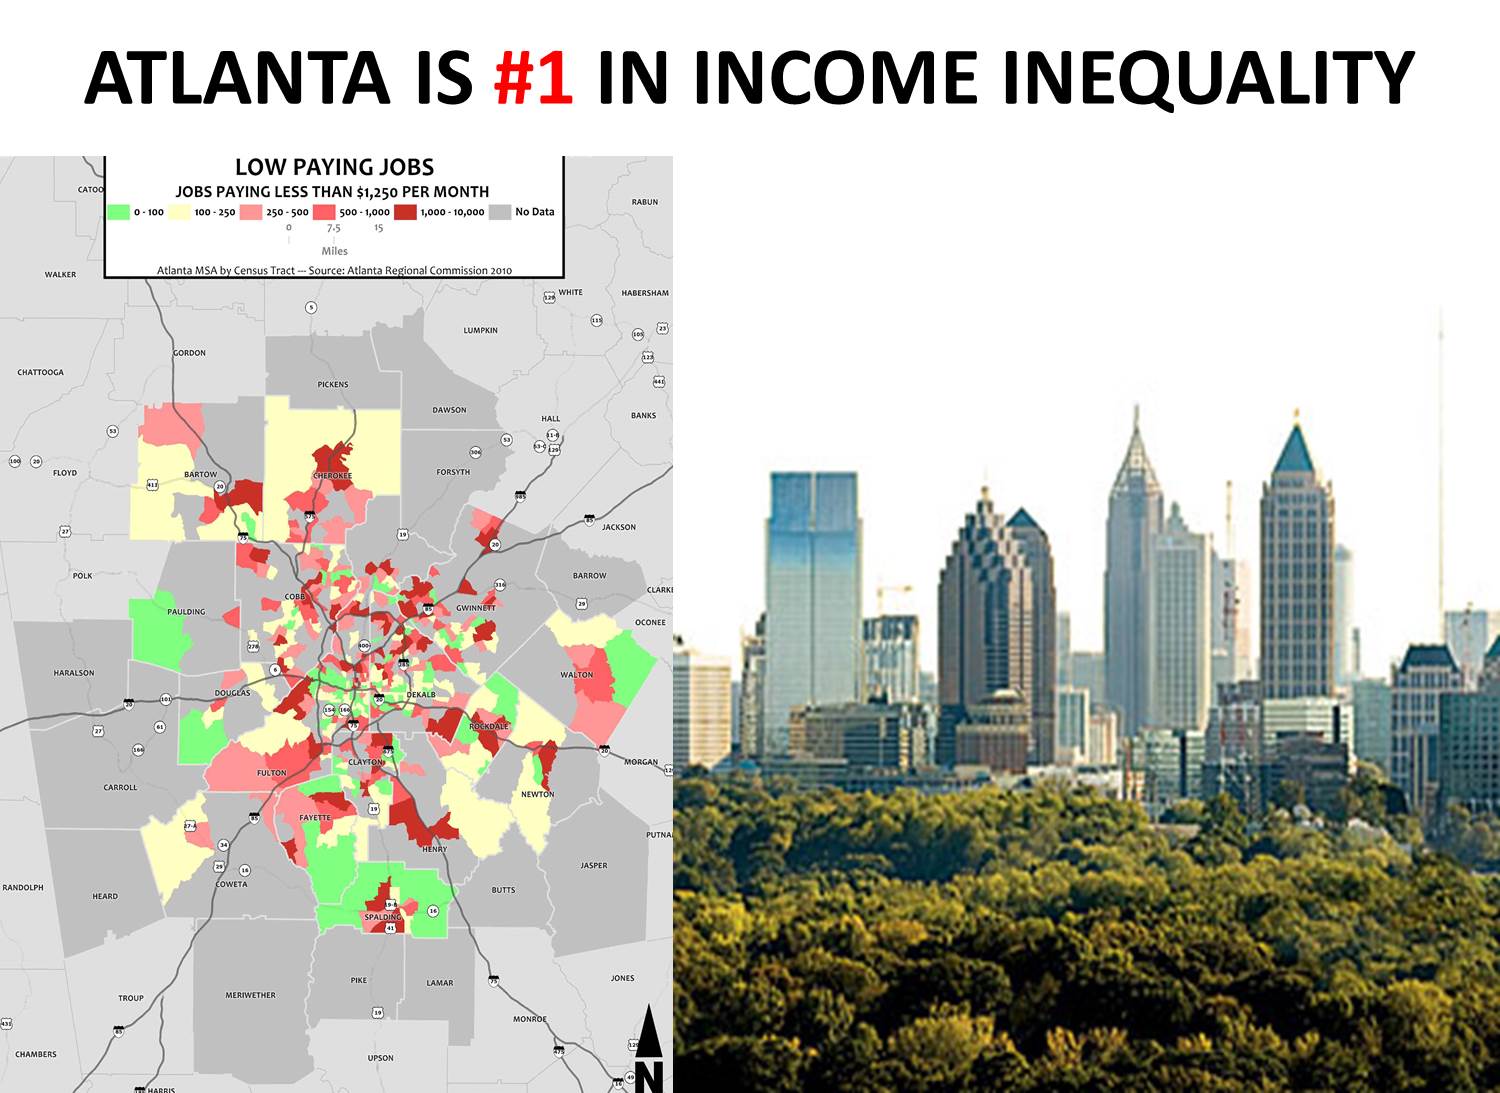 @Cl_ATL Op-Ed: Everyone’s To Blame for Income Inequality